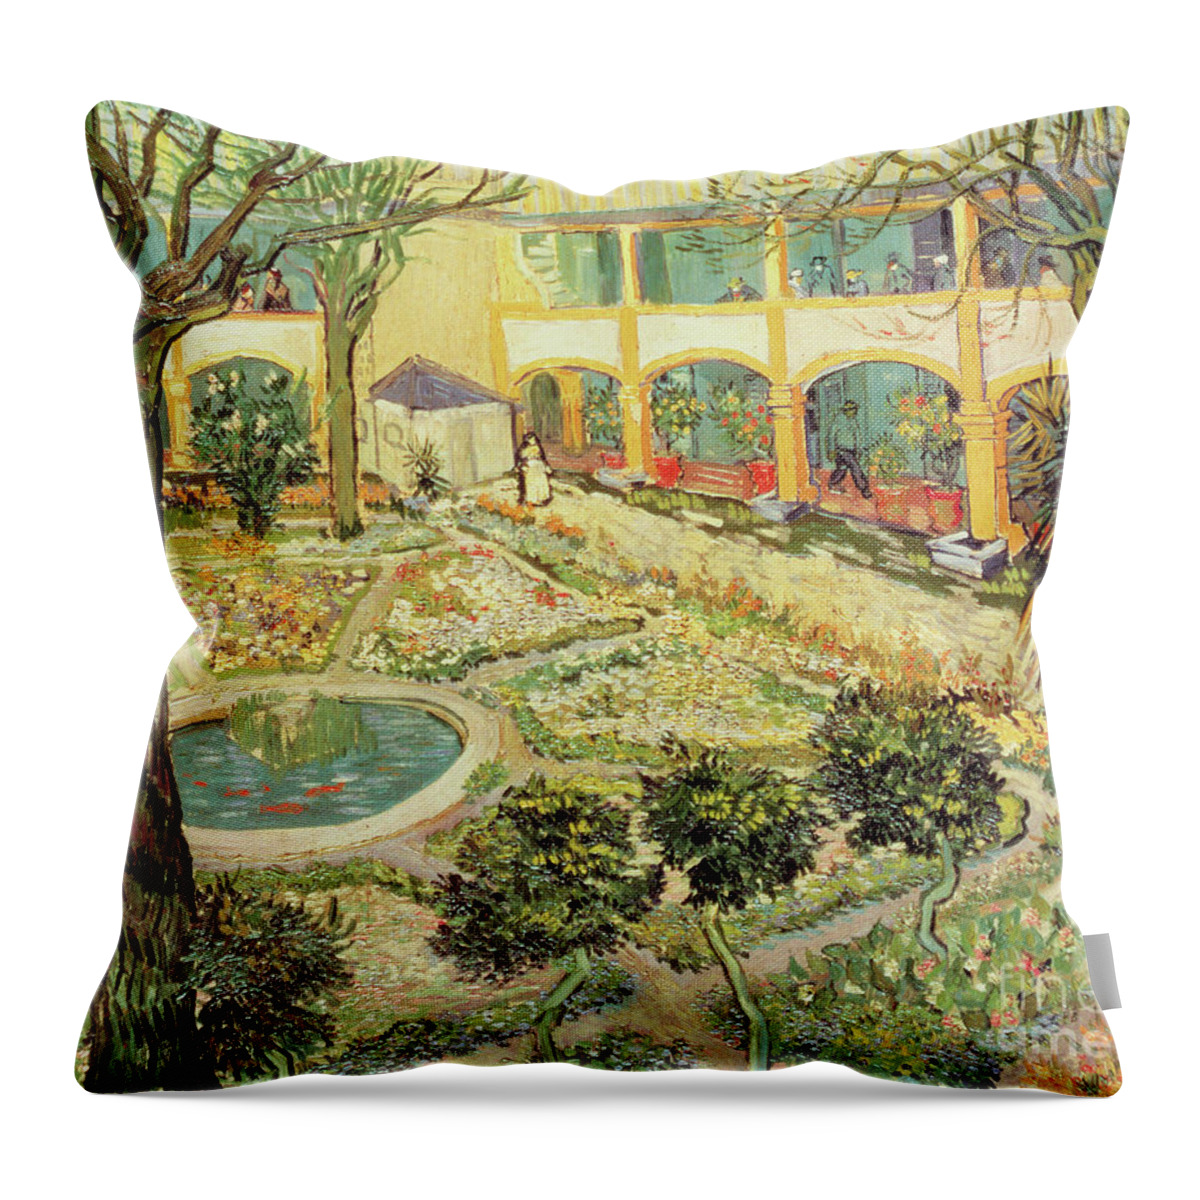 Vincent Van Gogh Throw Pillow featuring the painting The Asylum Garden at Arles by Vincent van Gogh